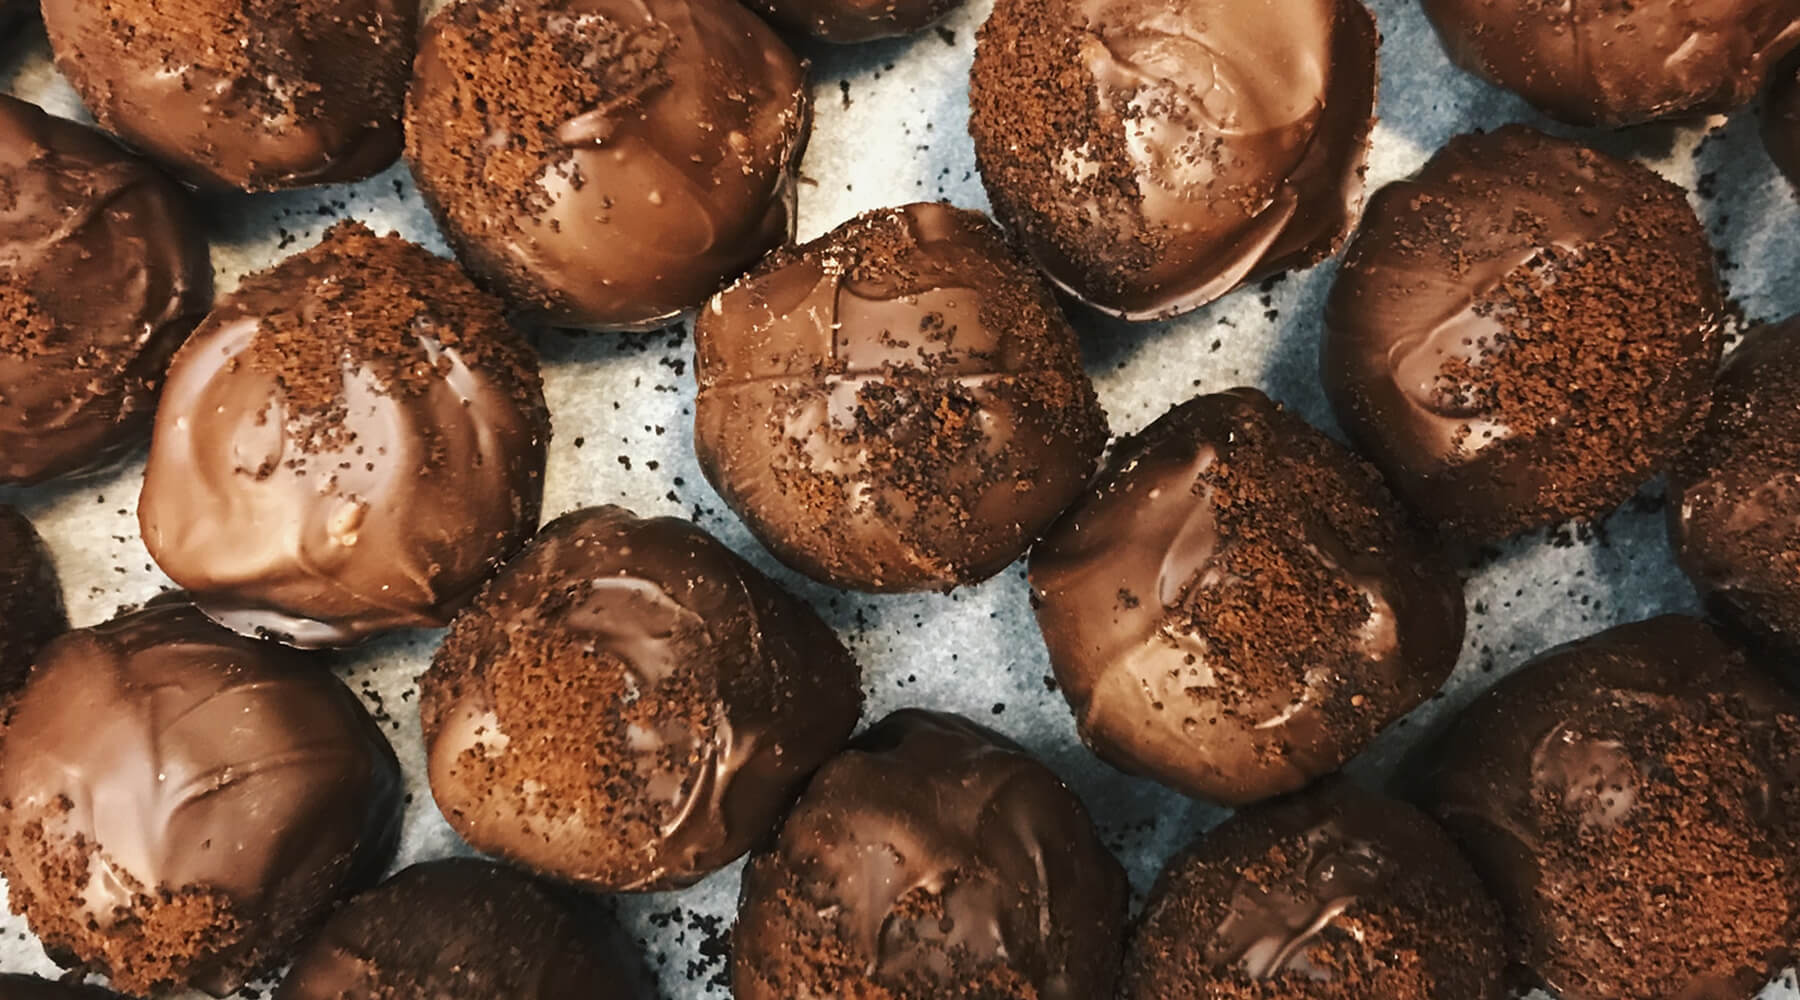 Chocolate Protein Balls with Banana and Chocolate Coating: A Decadent and Nutritious Snack